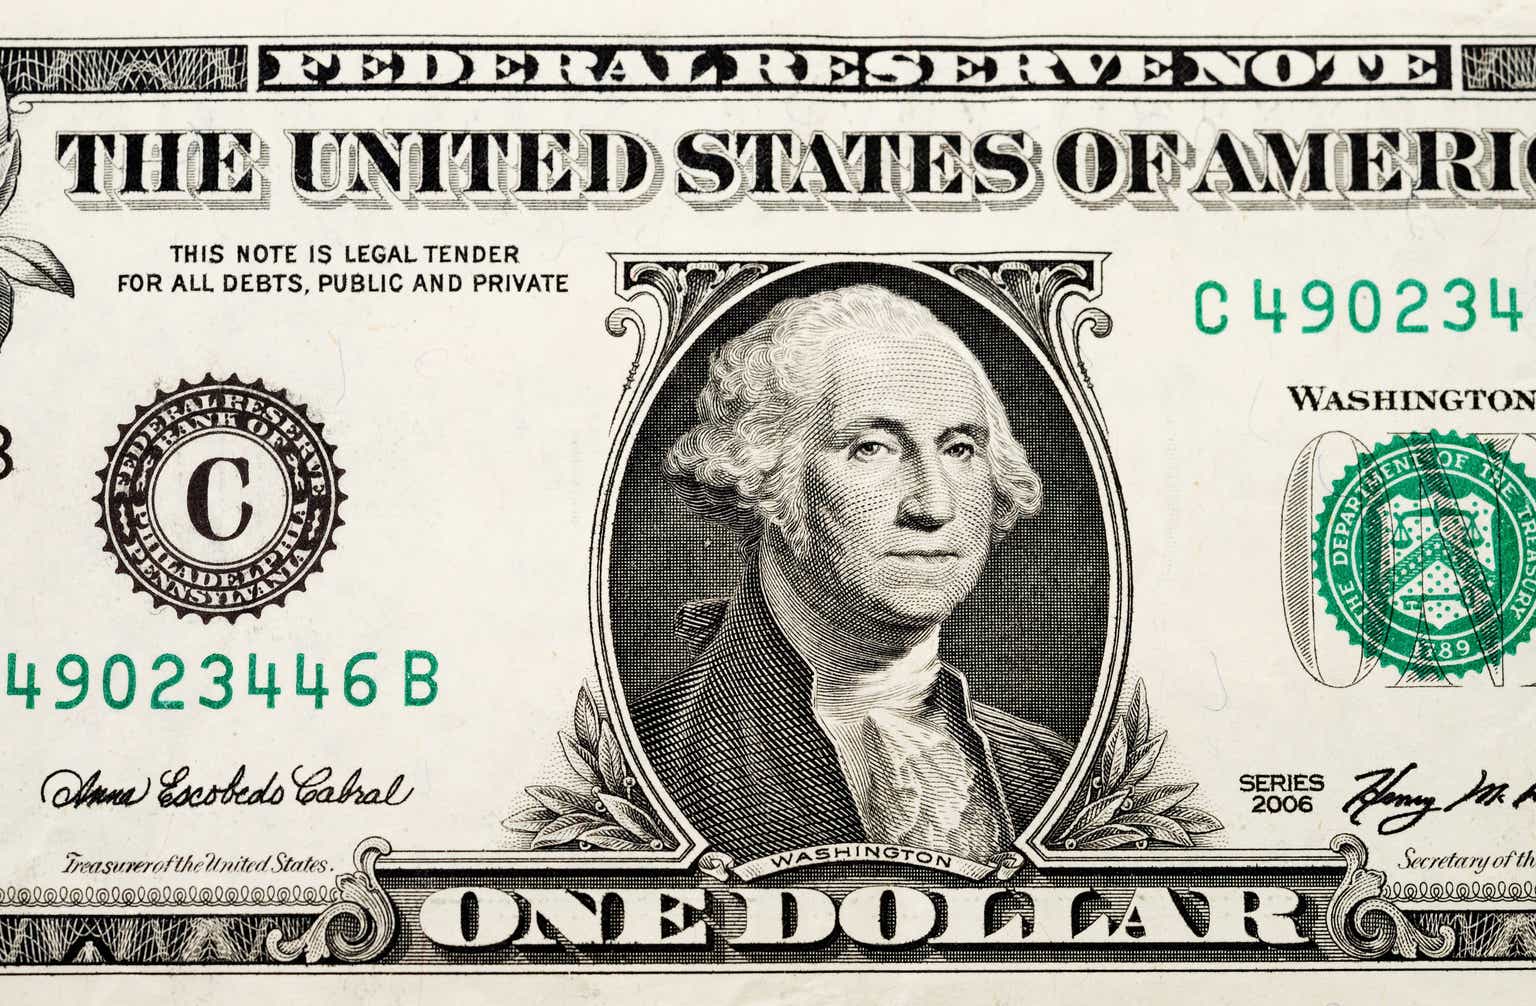 Us currency. Купюра 1 доллар. Американский доллар. Вашингтон на купюре доллара. Вашингтон на долларовой купюре.